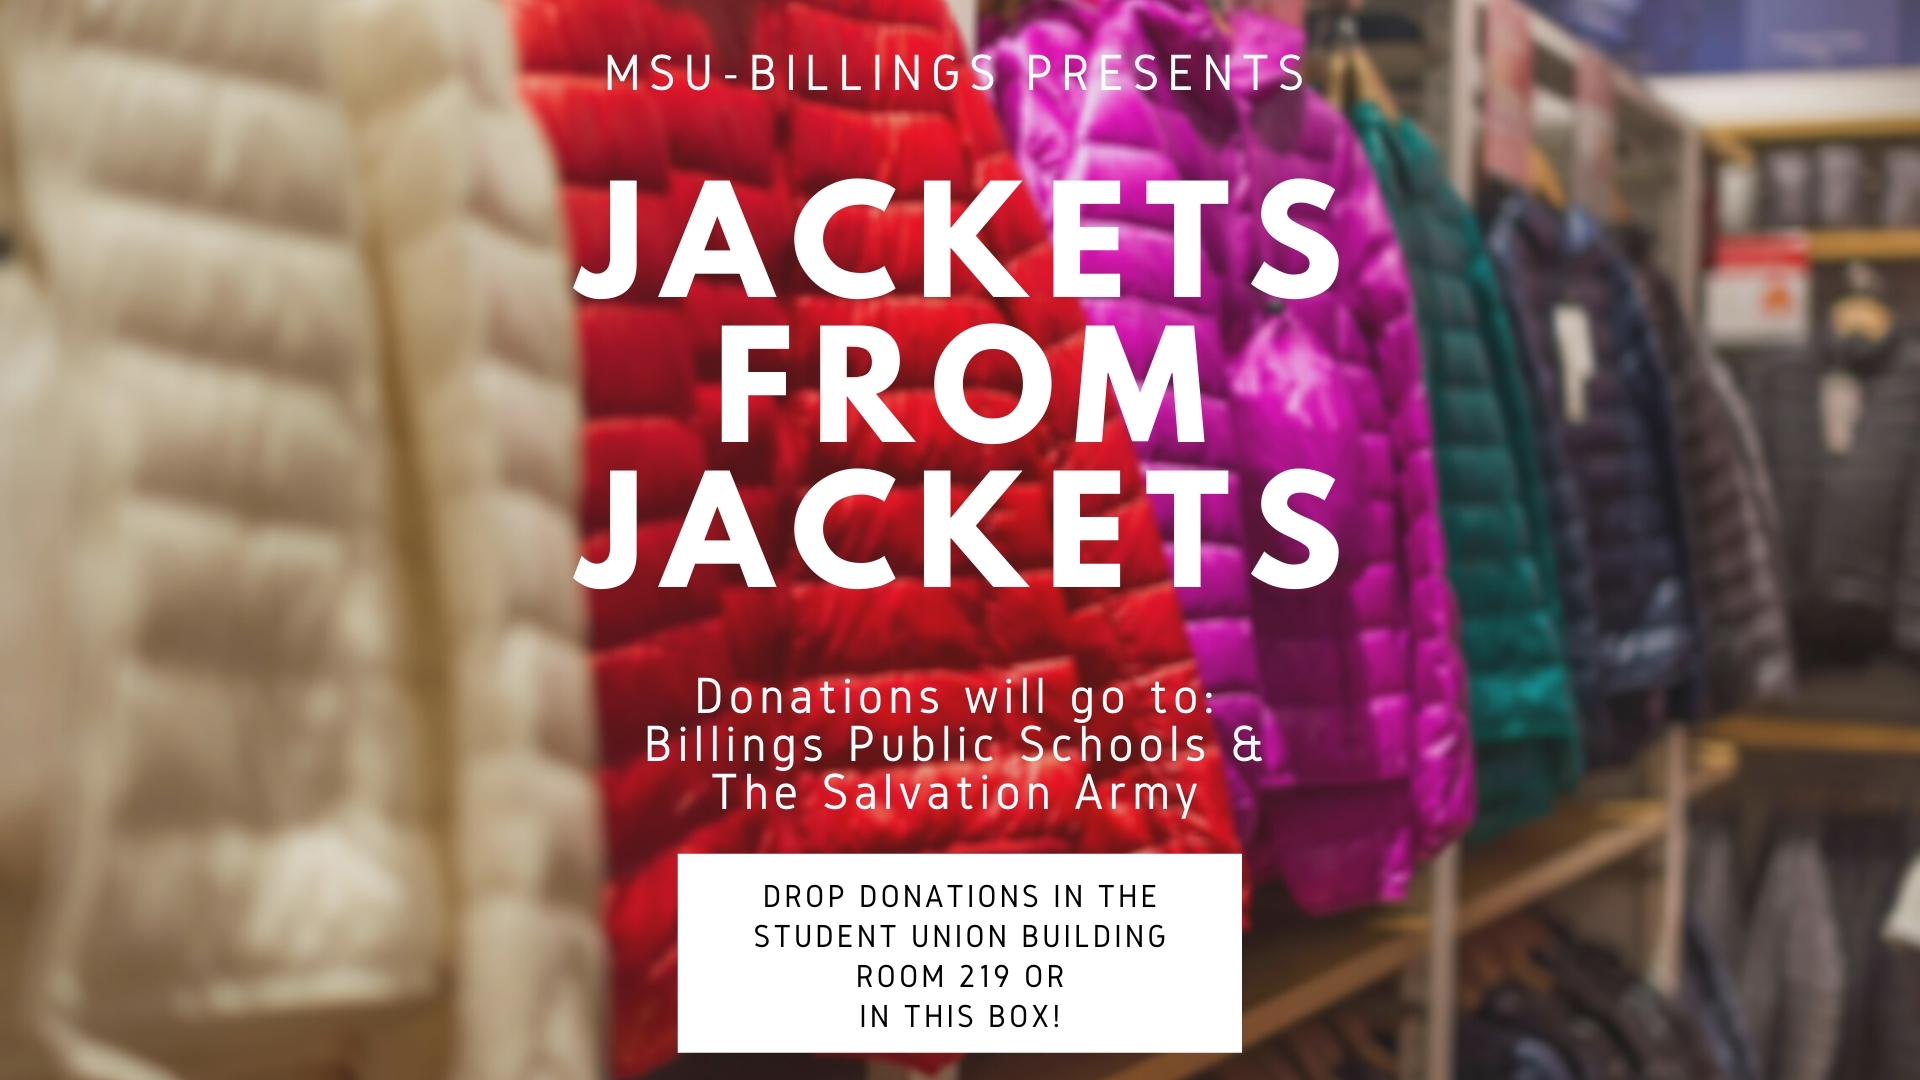 MSU-Billings presents Jackets from Jackets Donations will do to Billings Public Schools and the Salvation Army Drop donations in the student union building room 219